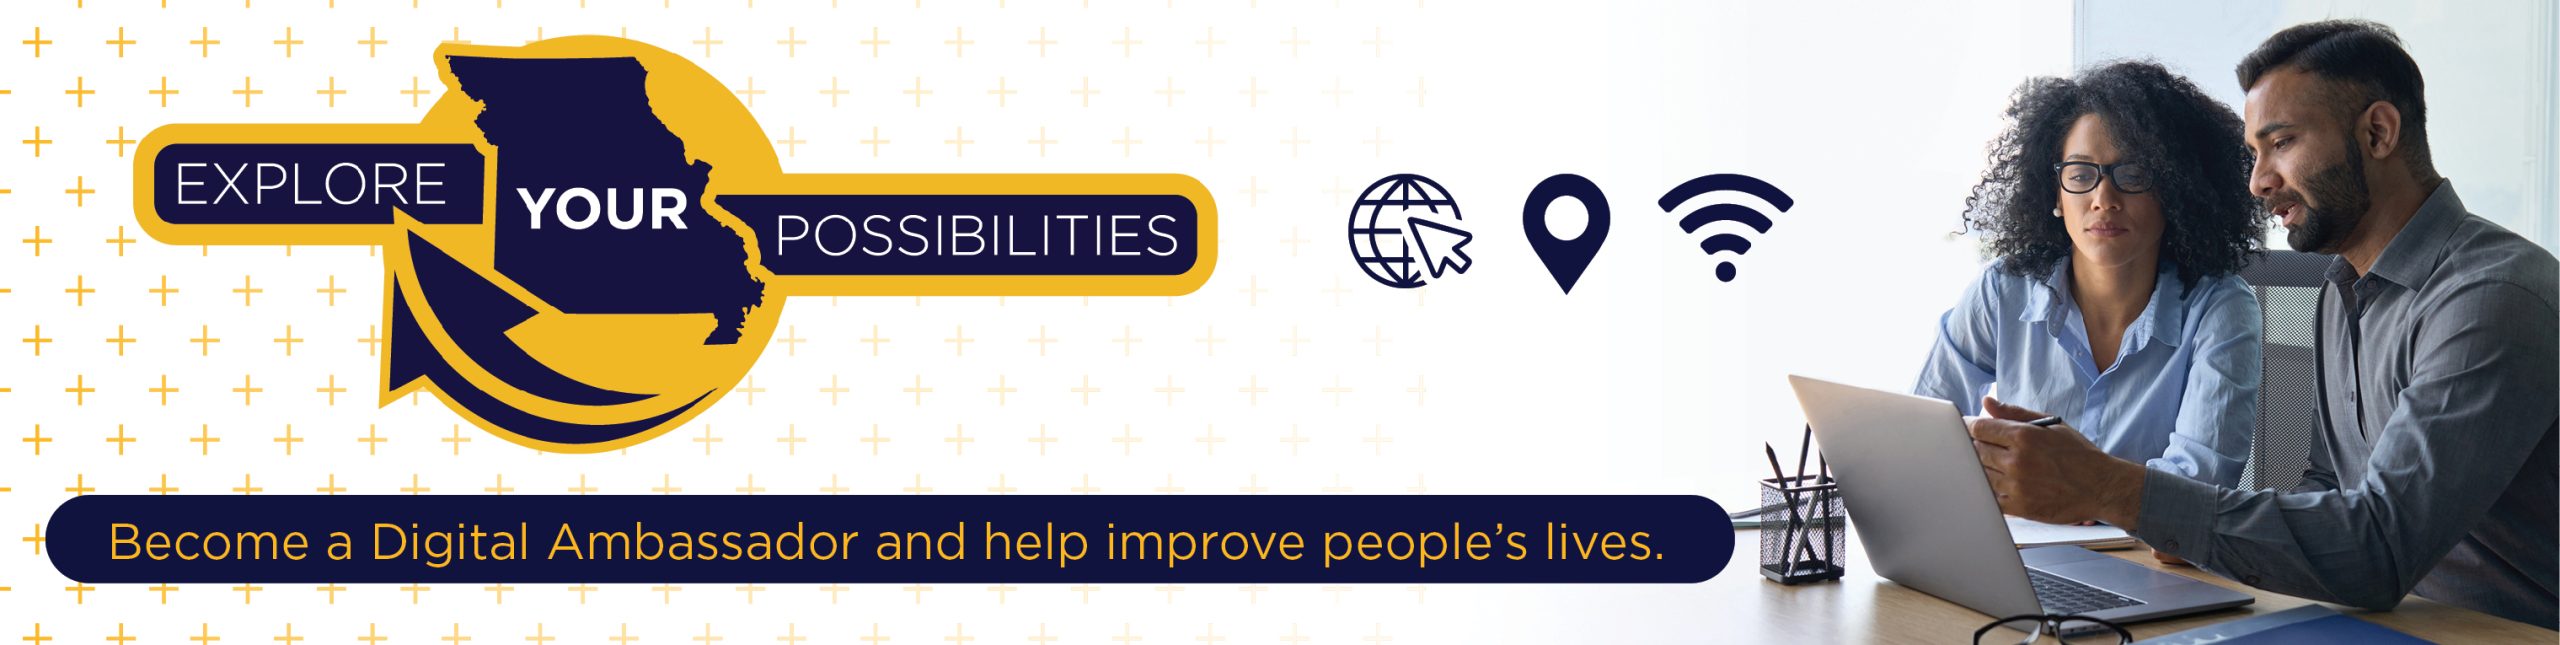 Explore your possibilities Become a Digital Ambassador to help improve peoples lives.